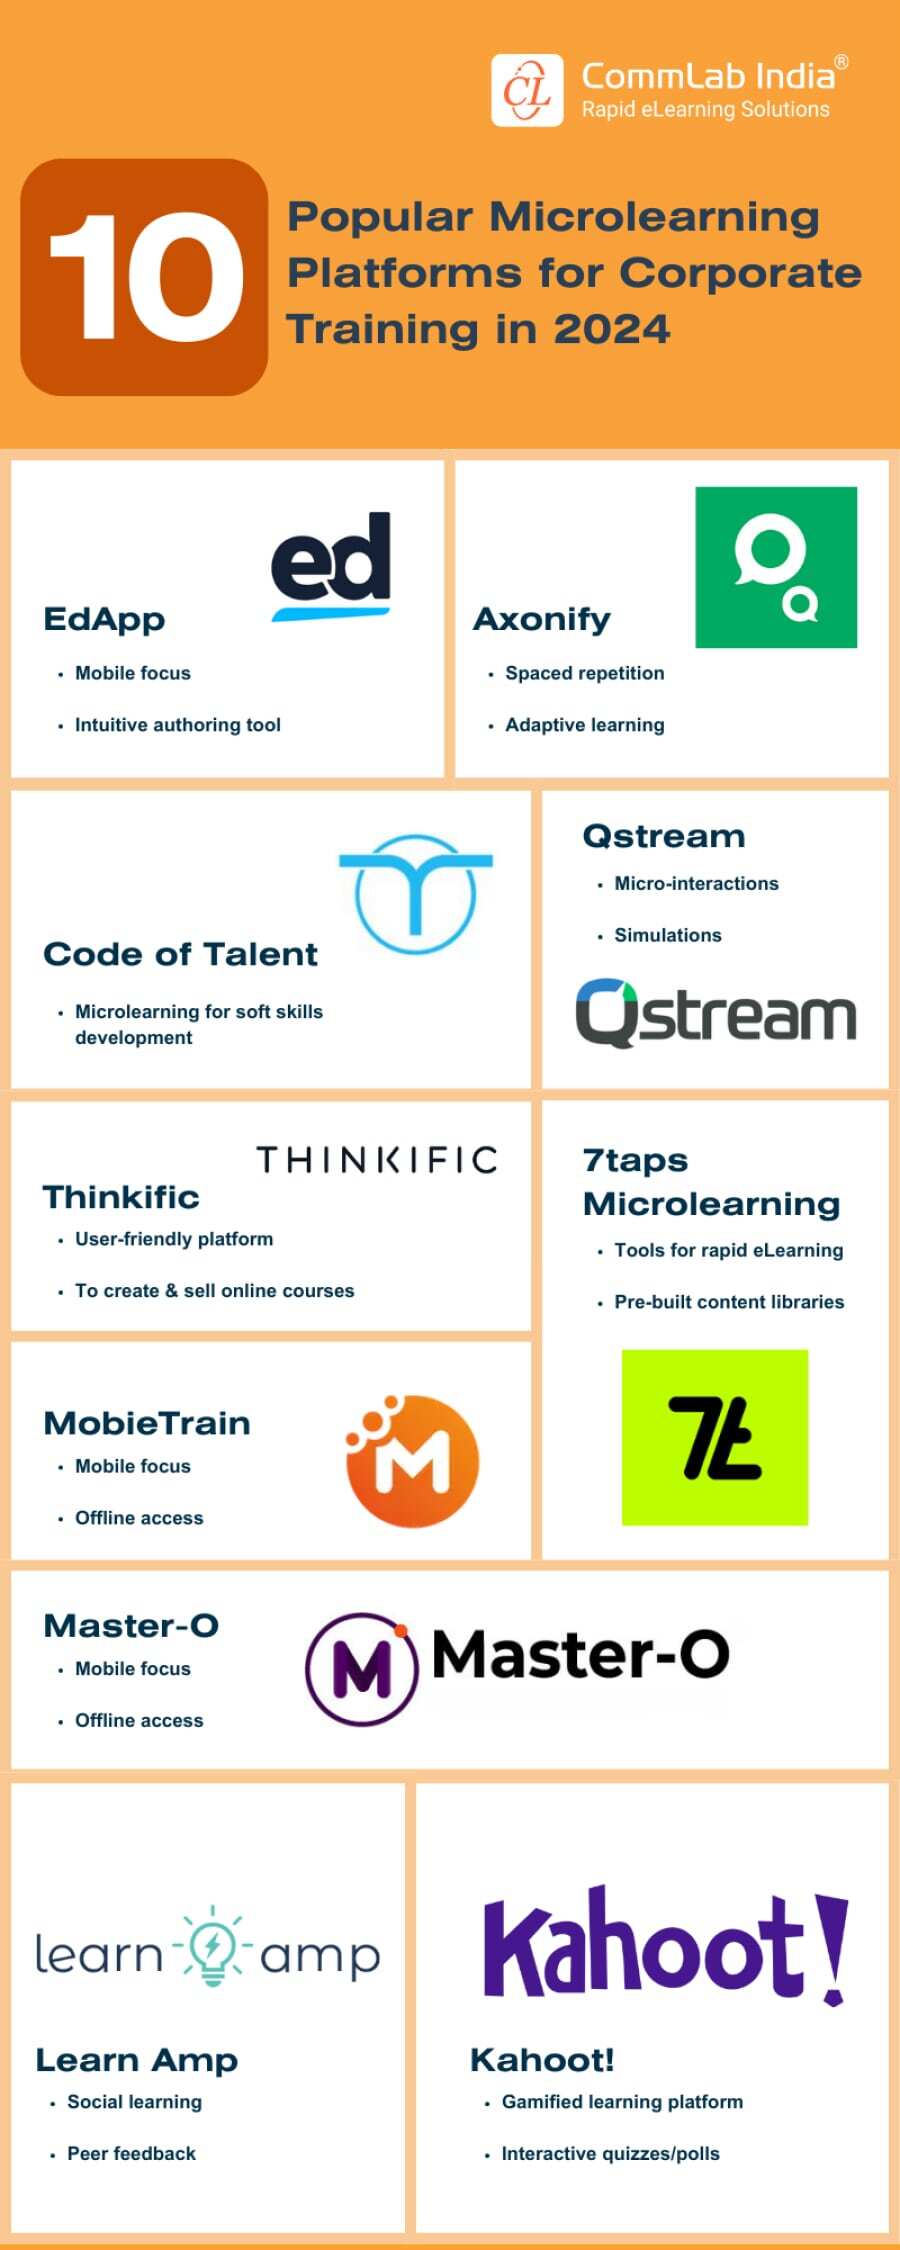 10 Popular Microlearning Platforms for Corporate Training in 2024